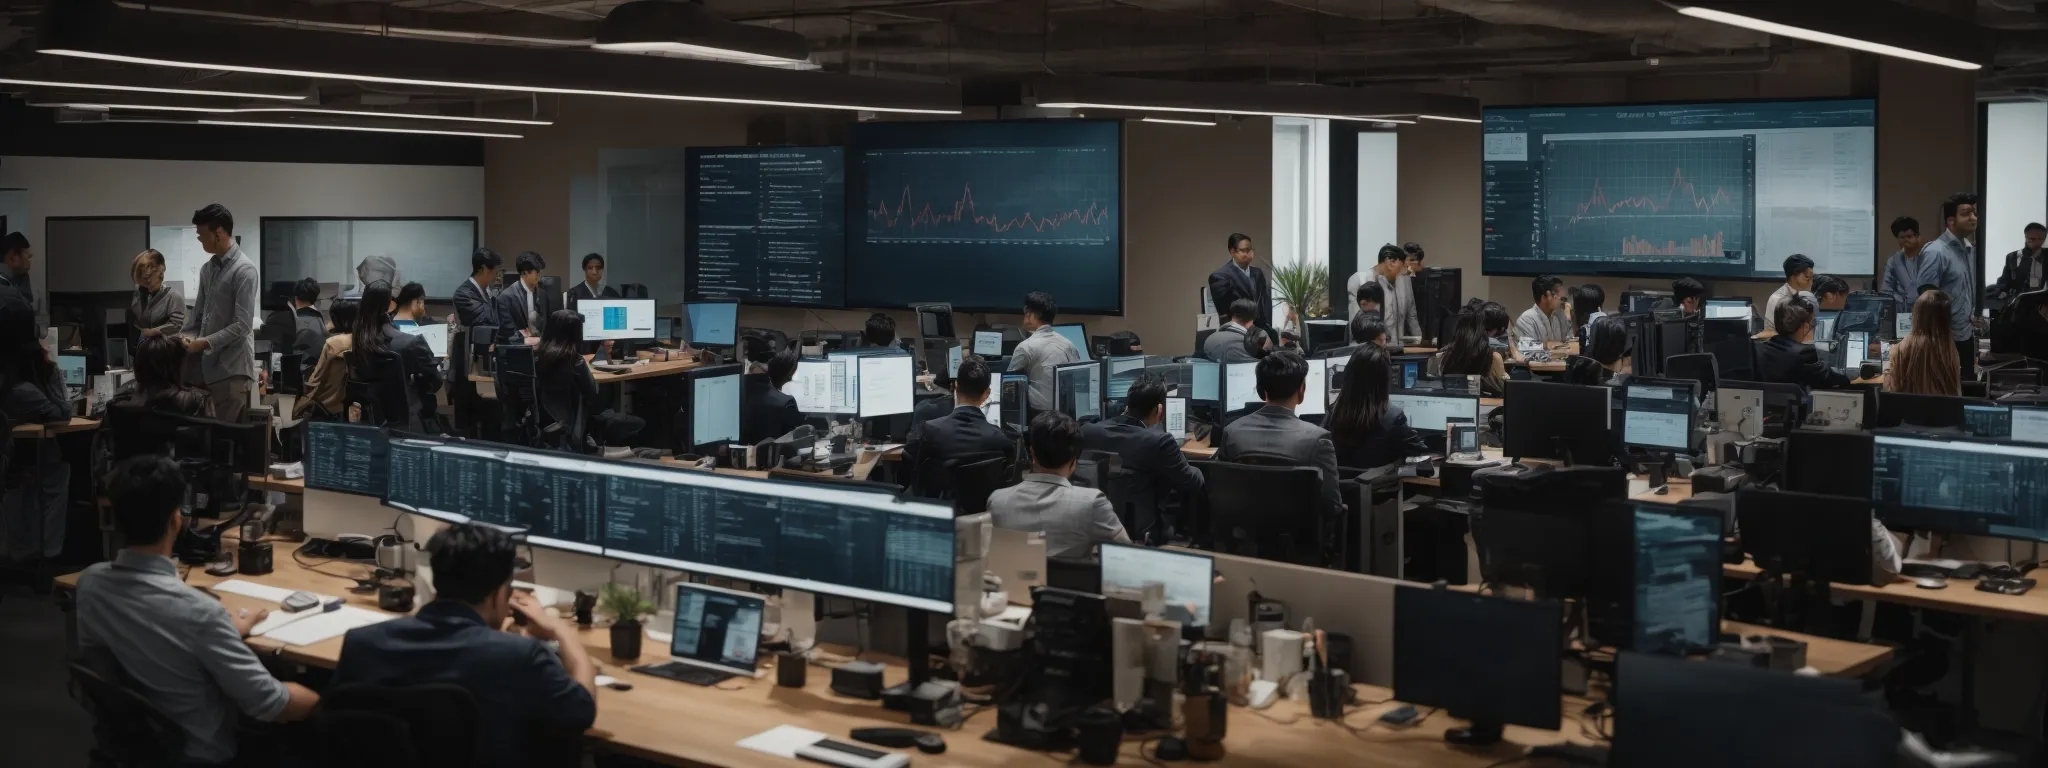 a bustling digital marketing office with diverse professionals strategizing around a large monitor displaying seo analytics.